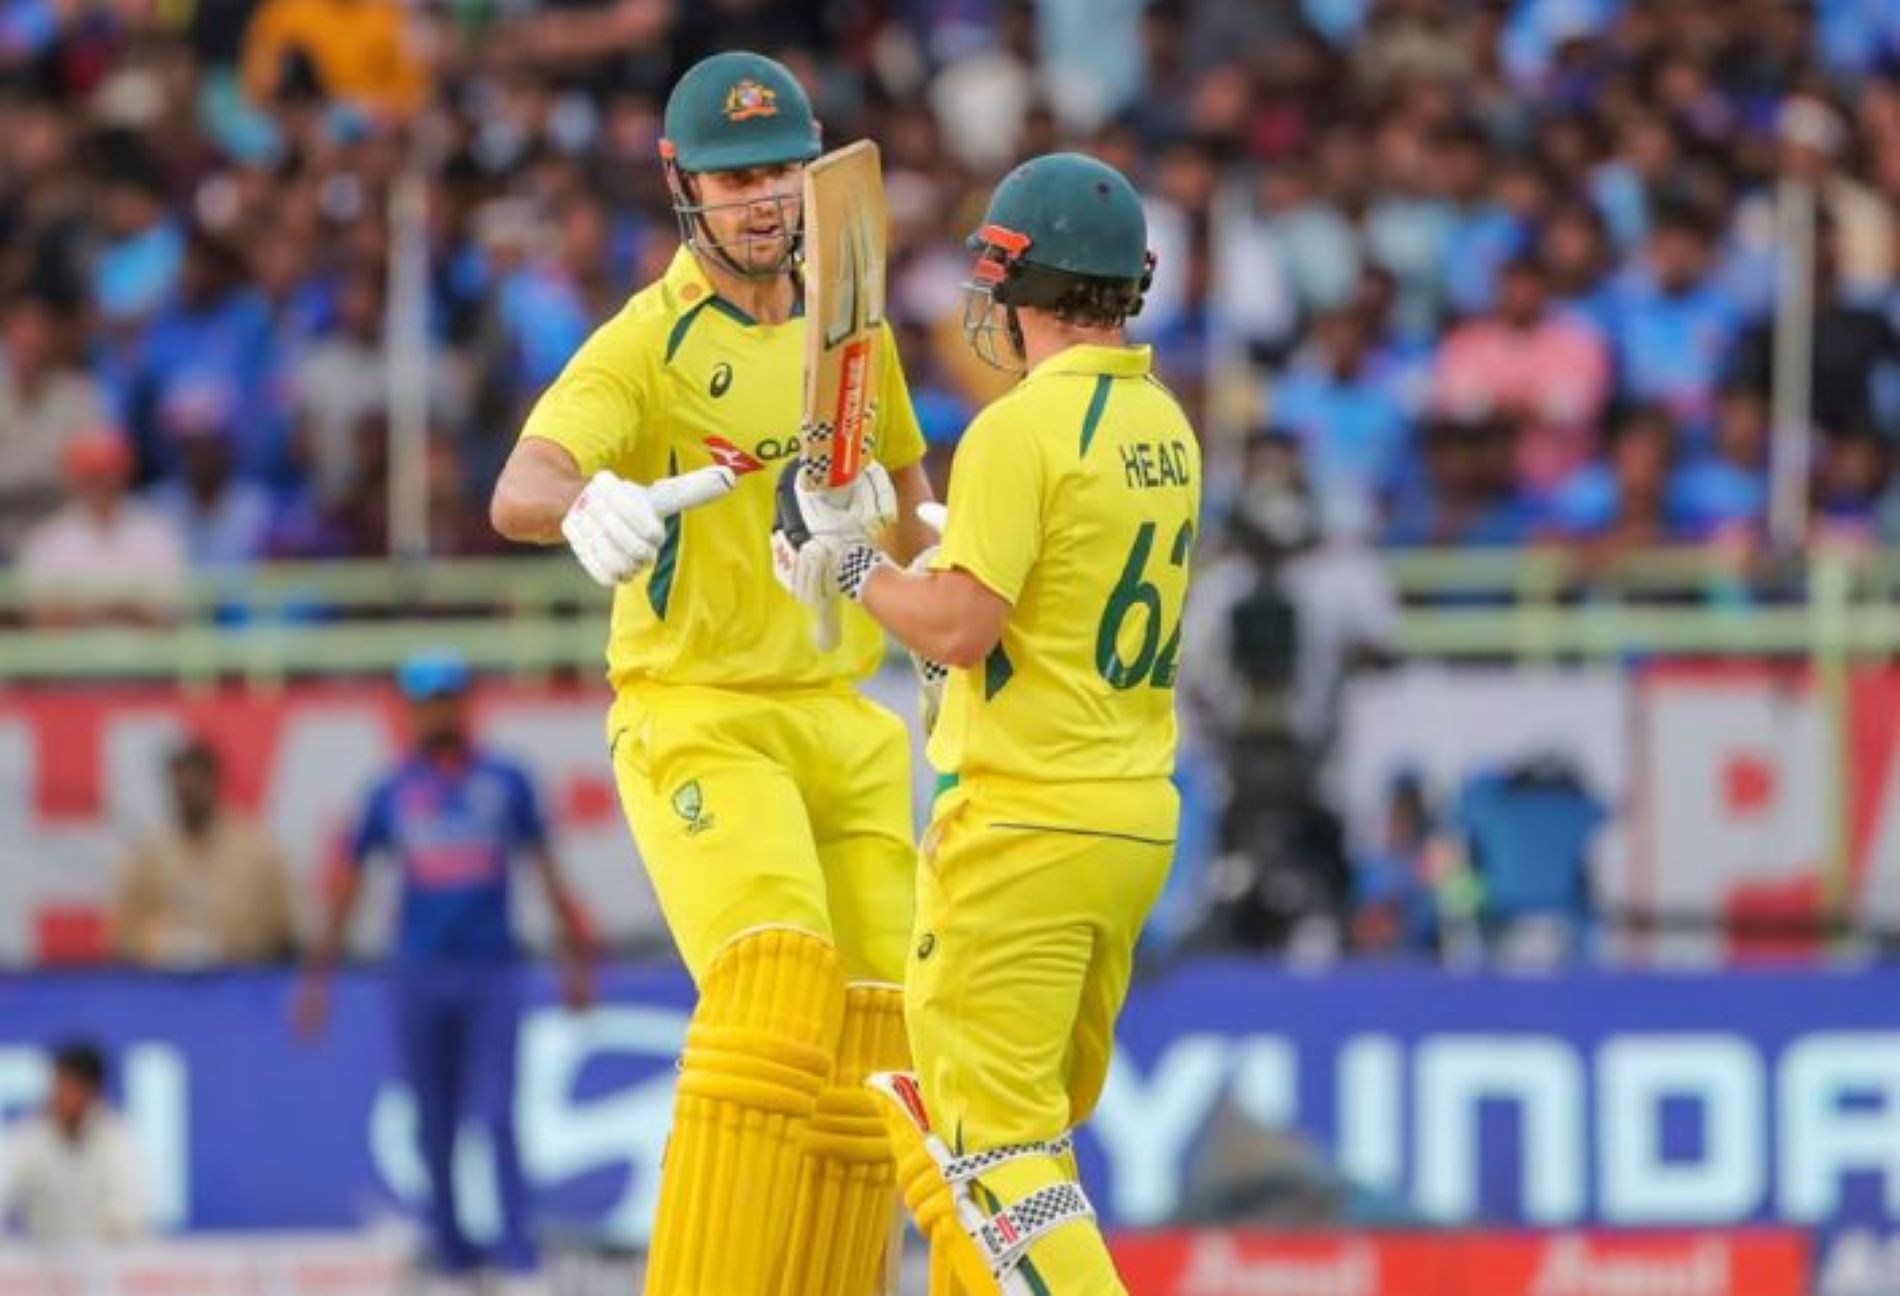 Mitchell Marsh and Travis Head form a dangerous opening partnership.